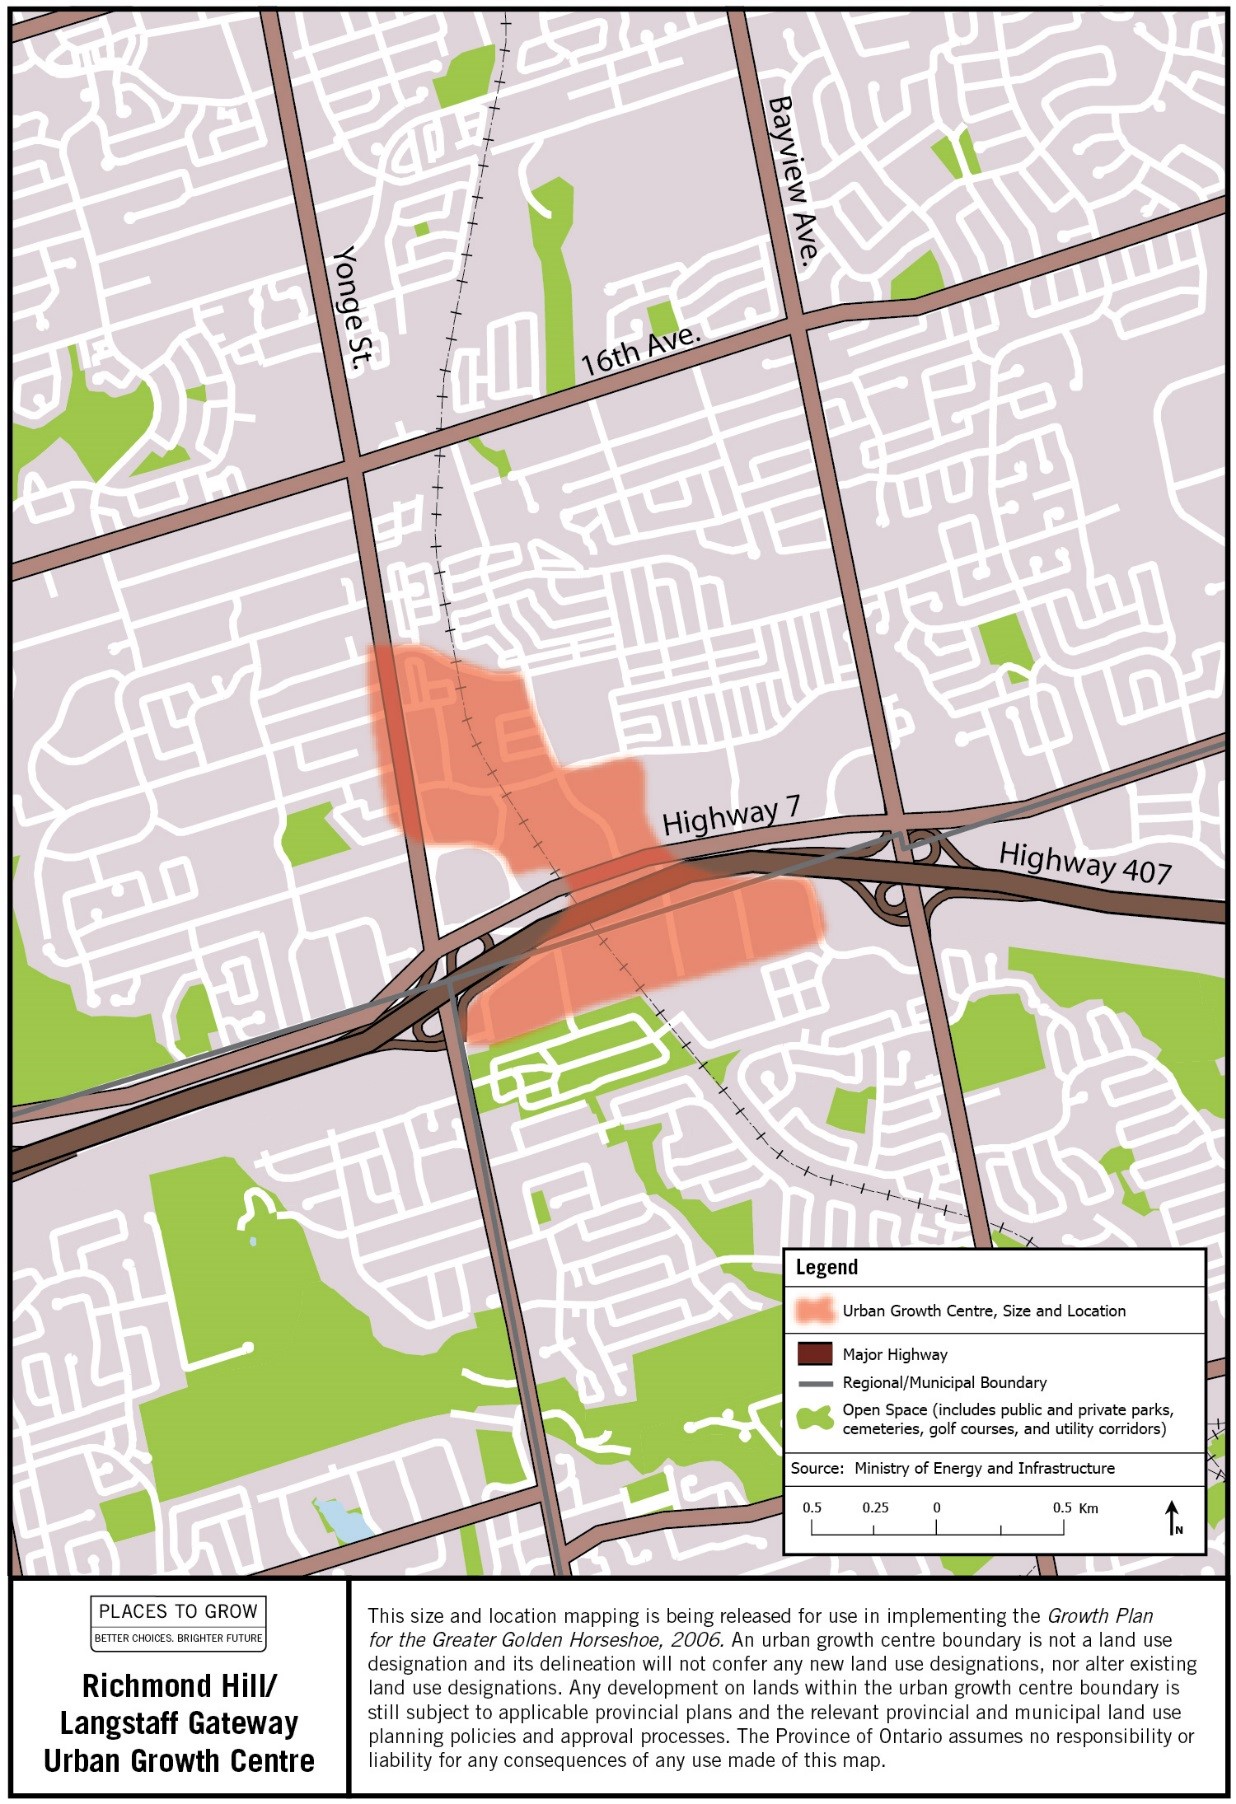 Map of the approximate size and location of the Richmond Hill/Langstaff Gateway Urban Growth Centre in the vicinity of Highway 7 between Yonge Street and Bayview Avenue.